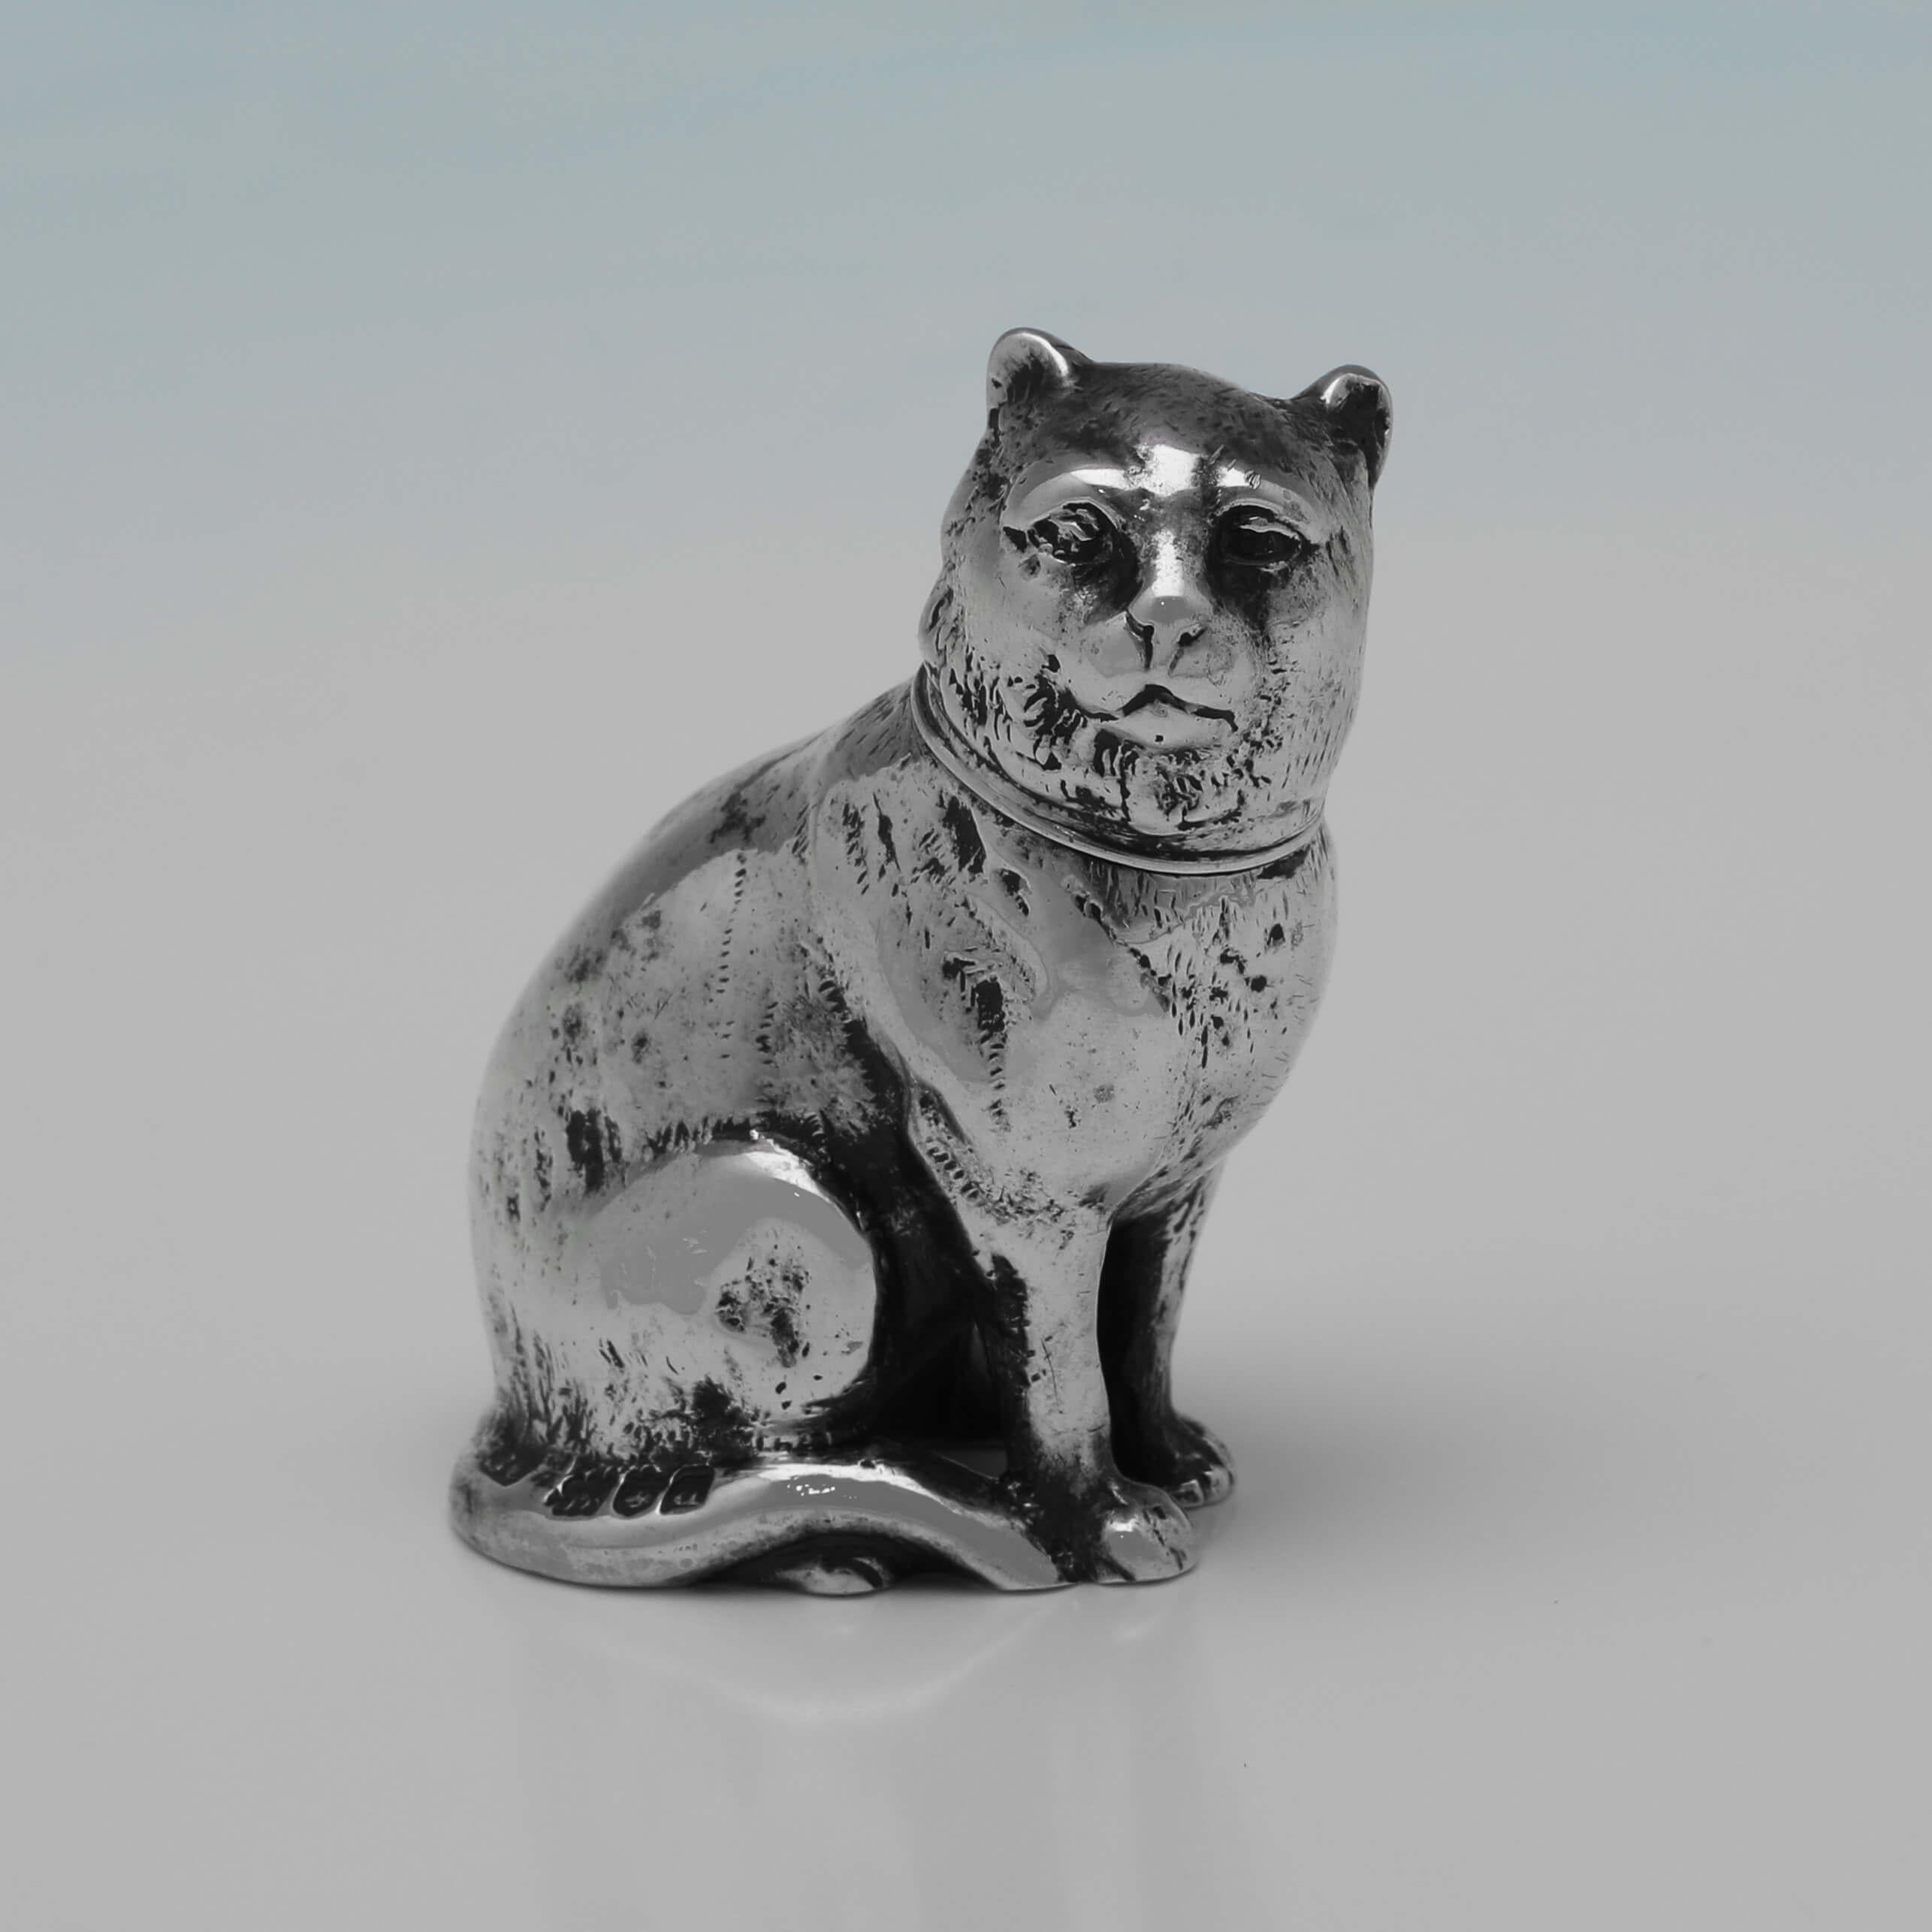 Hallmarked in London in 1899 by Stuart Clifford, this very rare pair of Antique, Sterling Silver Pepper Pots, are modelled as a seated Cat & Dog. Each measures roughly 2.25